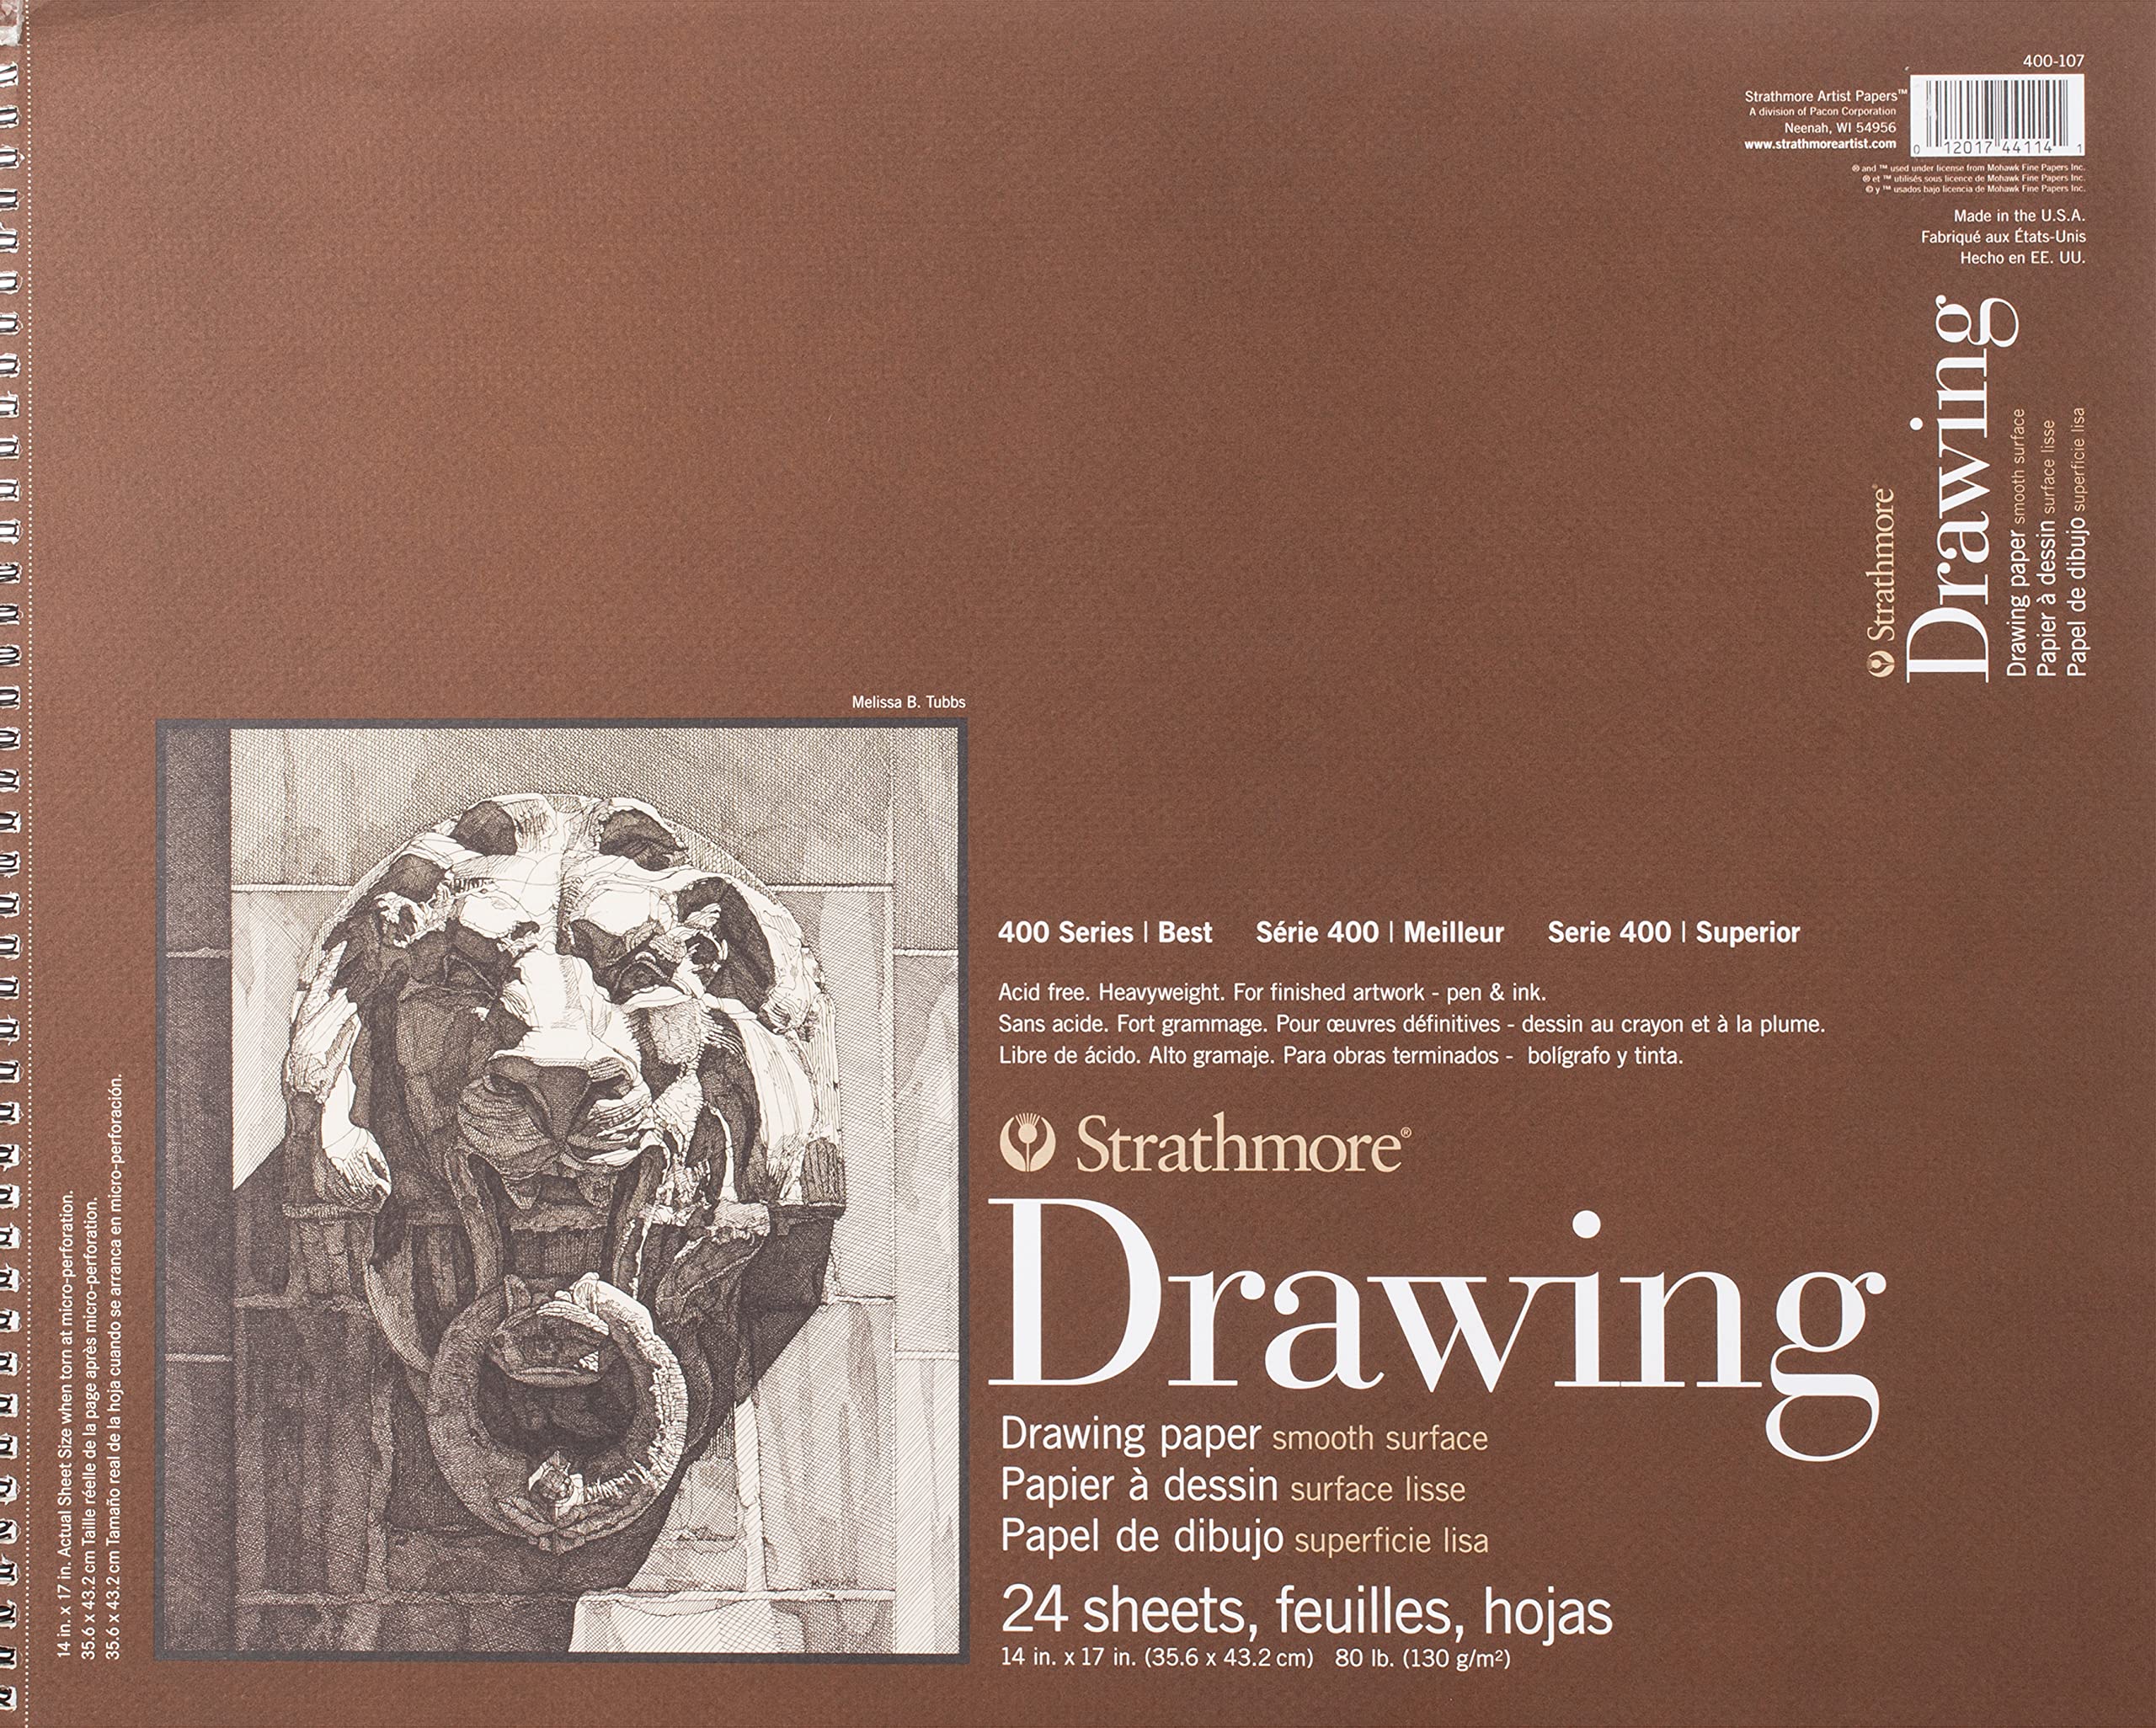 Drawing - Strathmore Artist Papers